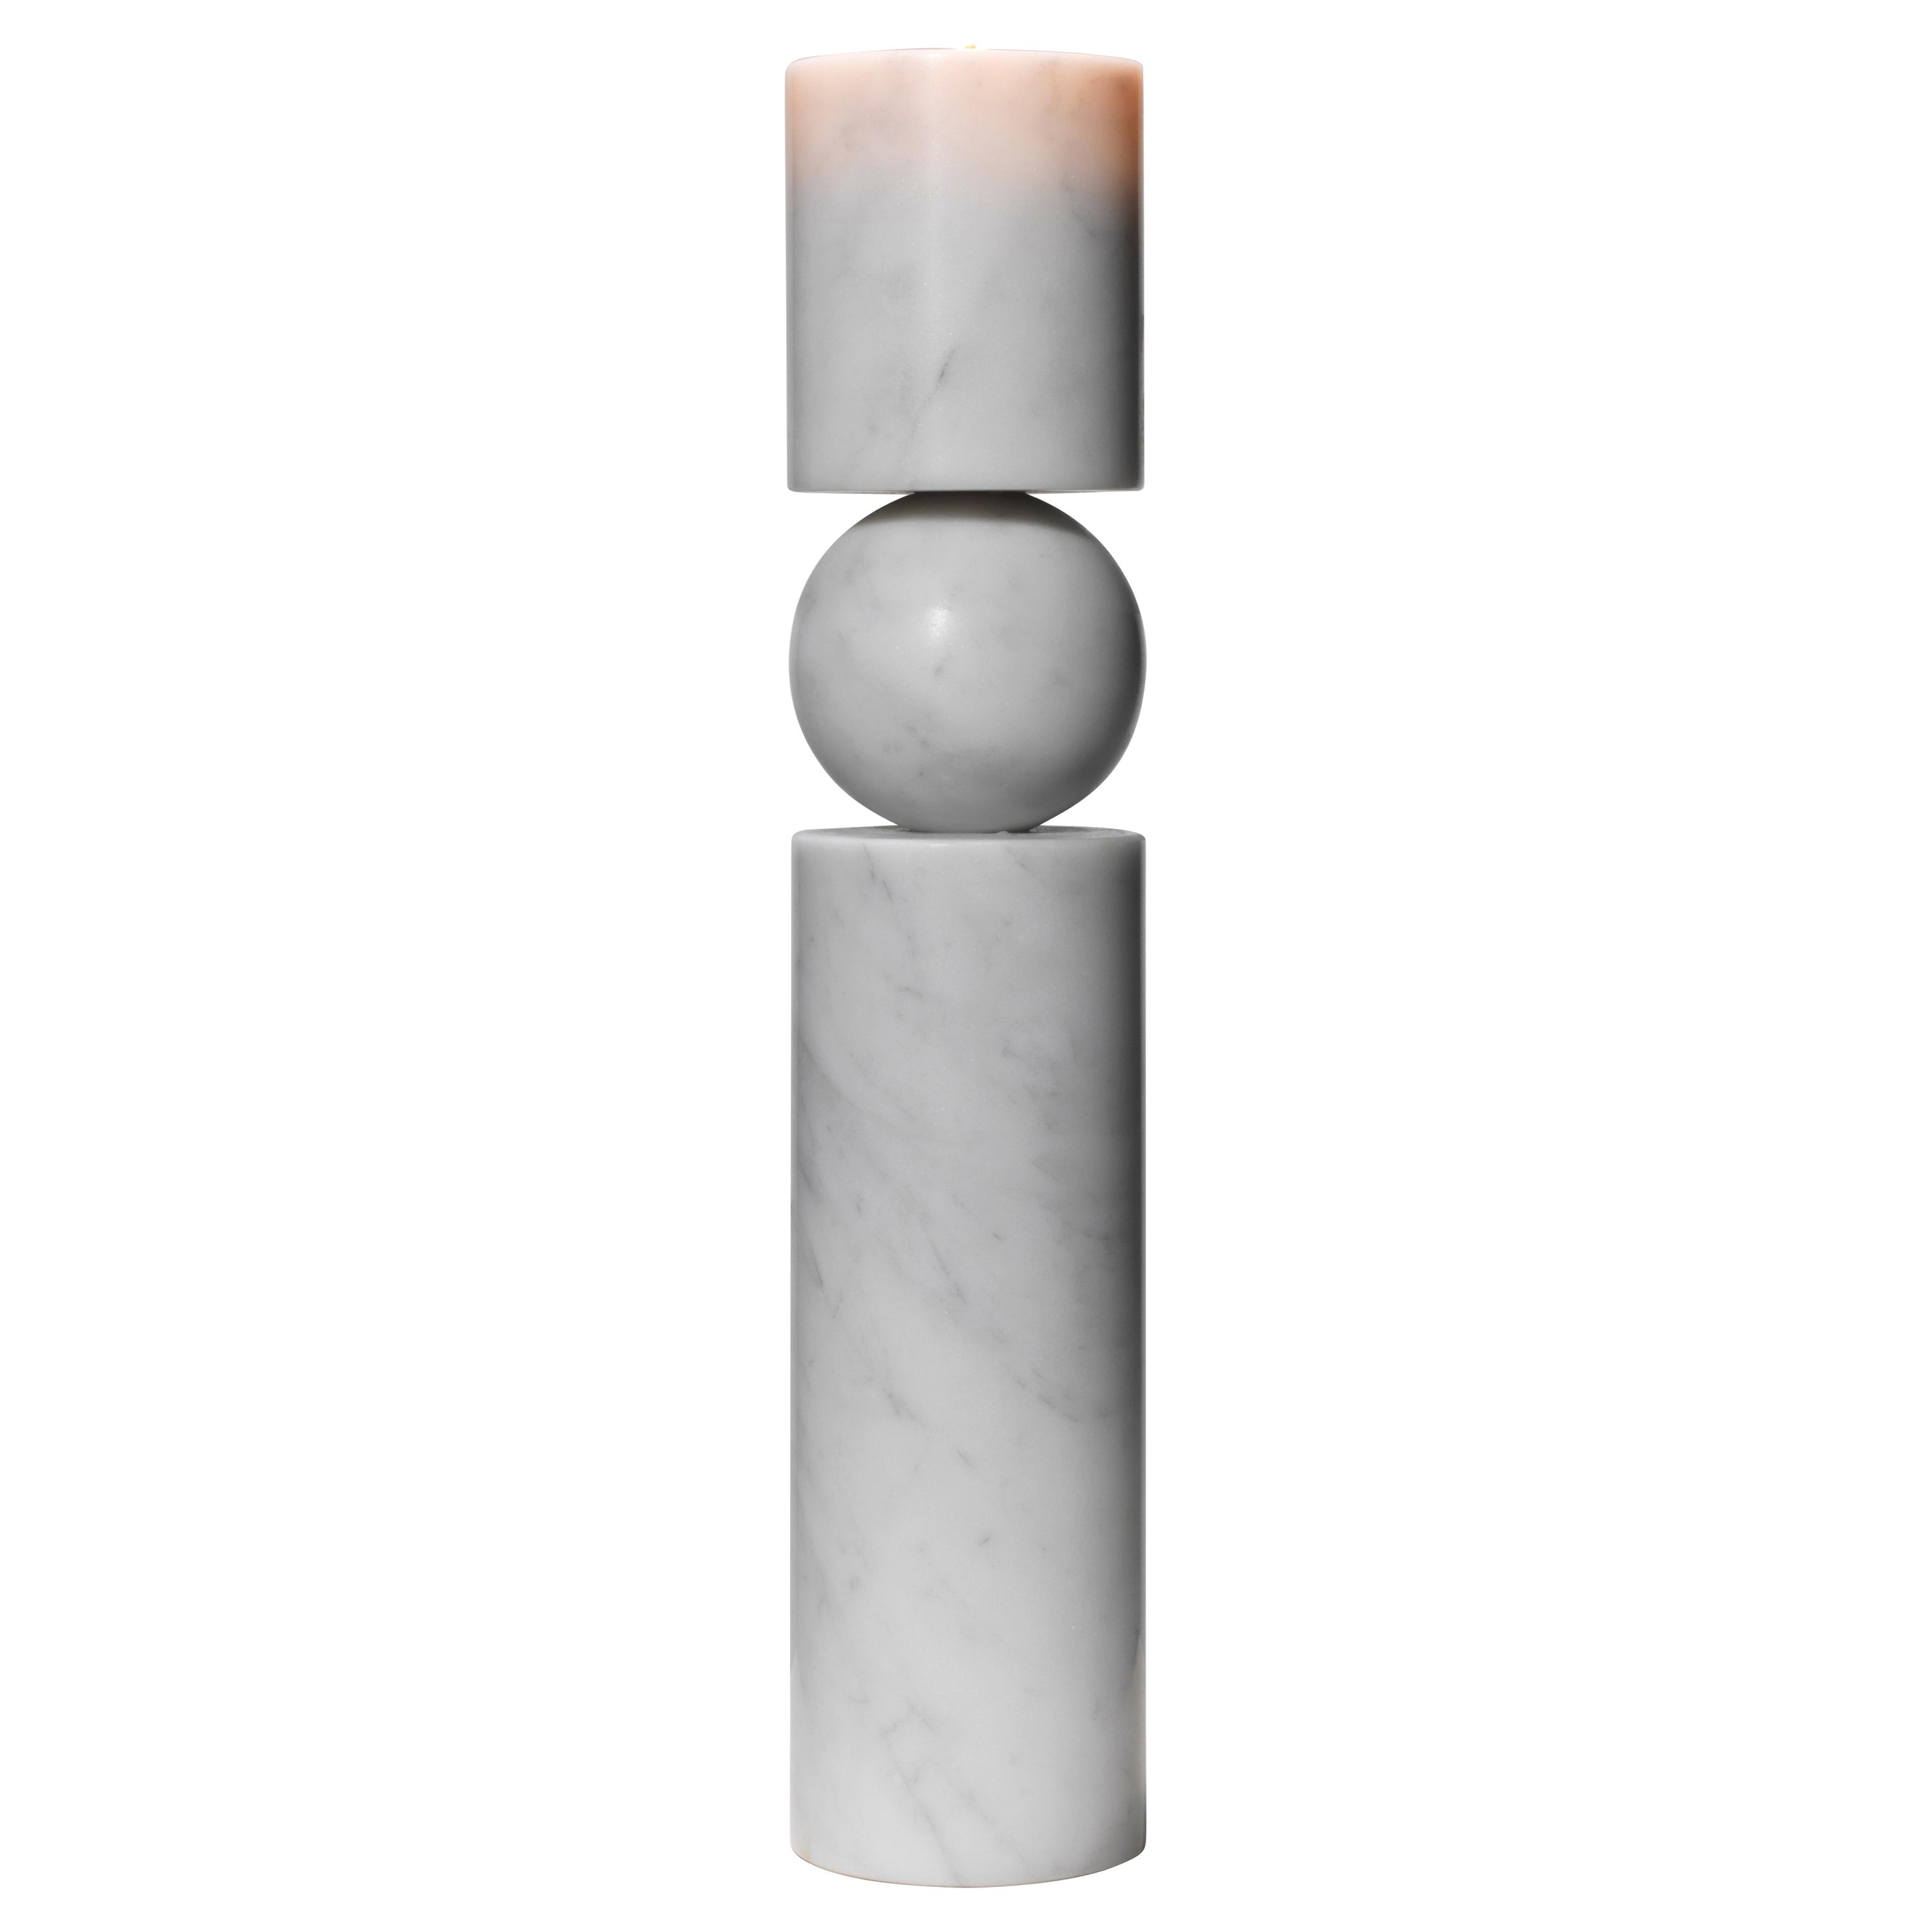 Lee Broom - Fulcrum Candlestick White Marble - Large For Sale